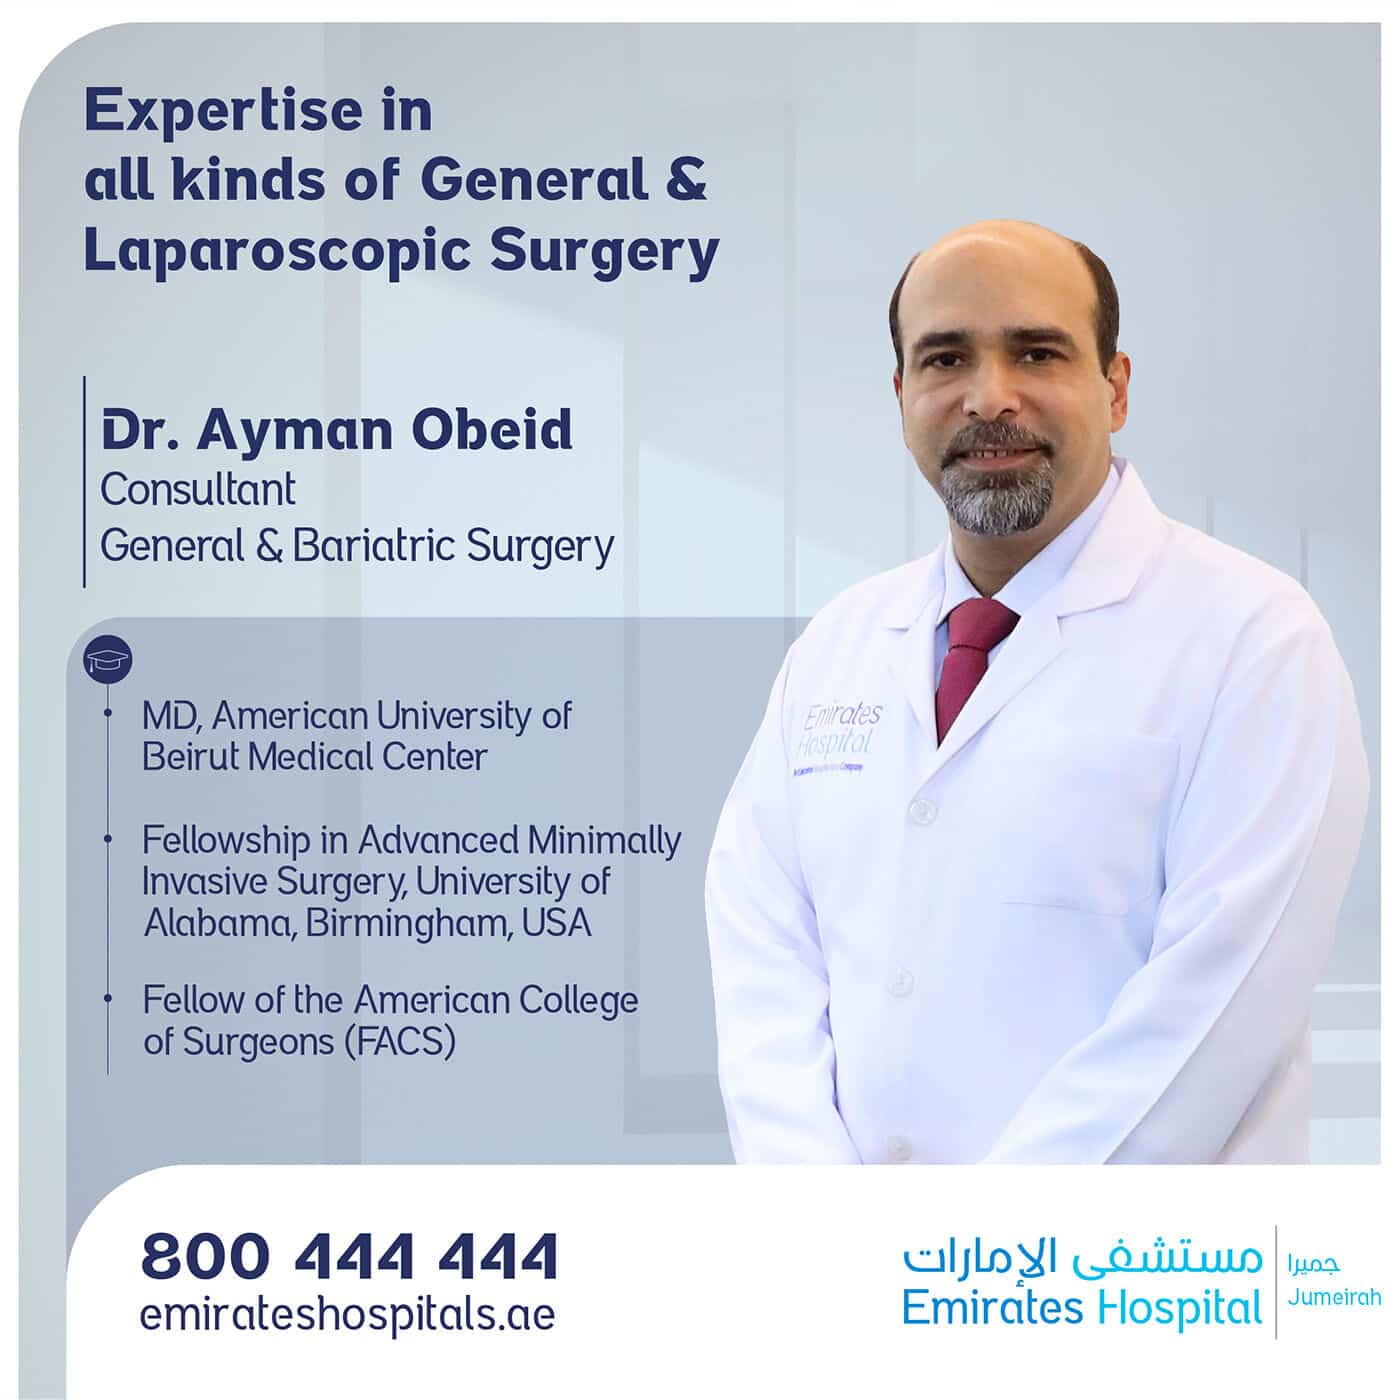 Dr. Ayman Obeid, Consultant – General & Bariatric Surgery Joined Emirates Hospital, Jumeirah